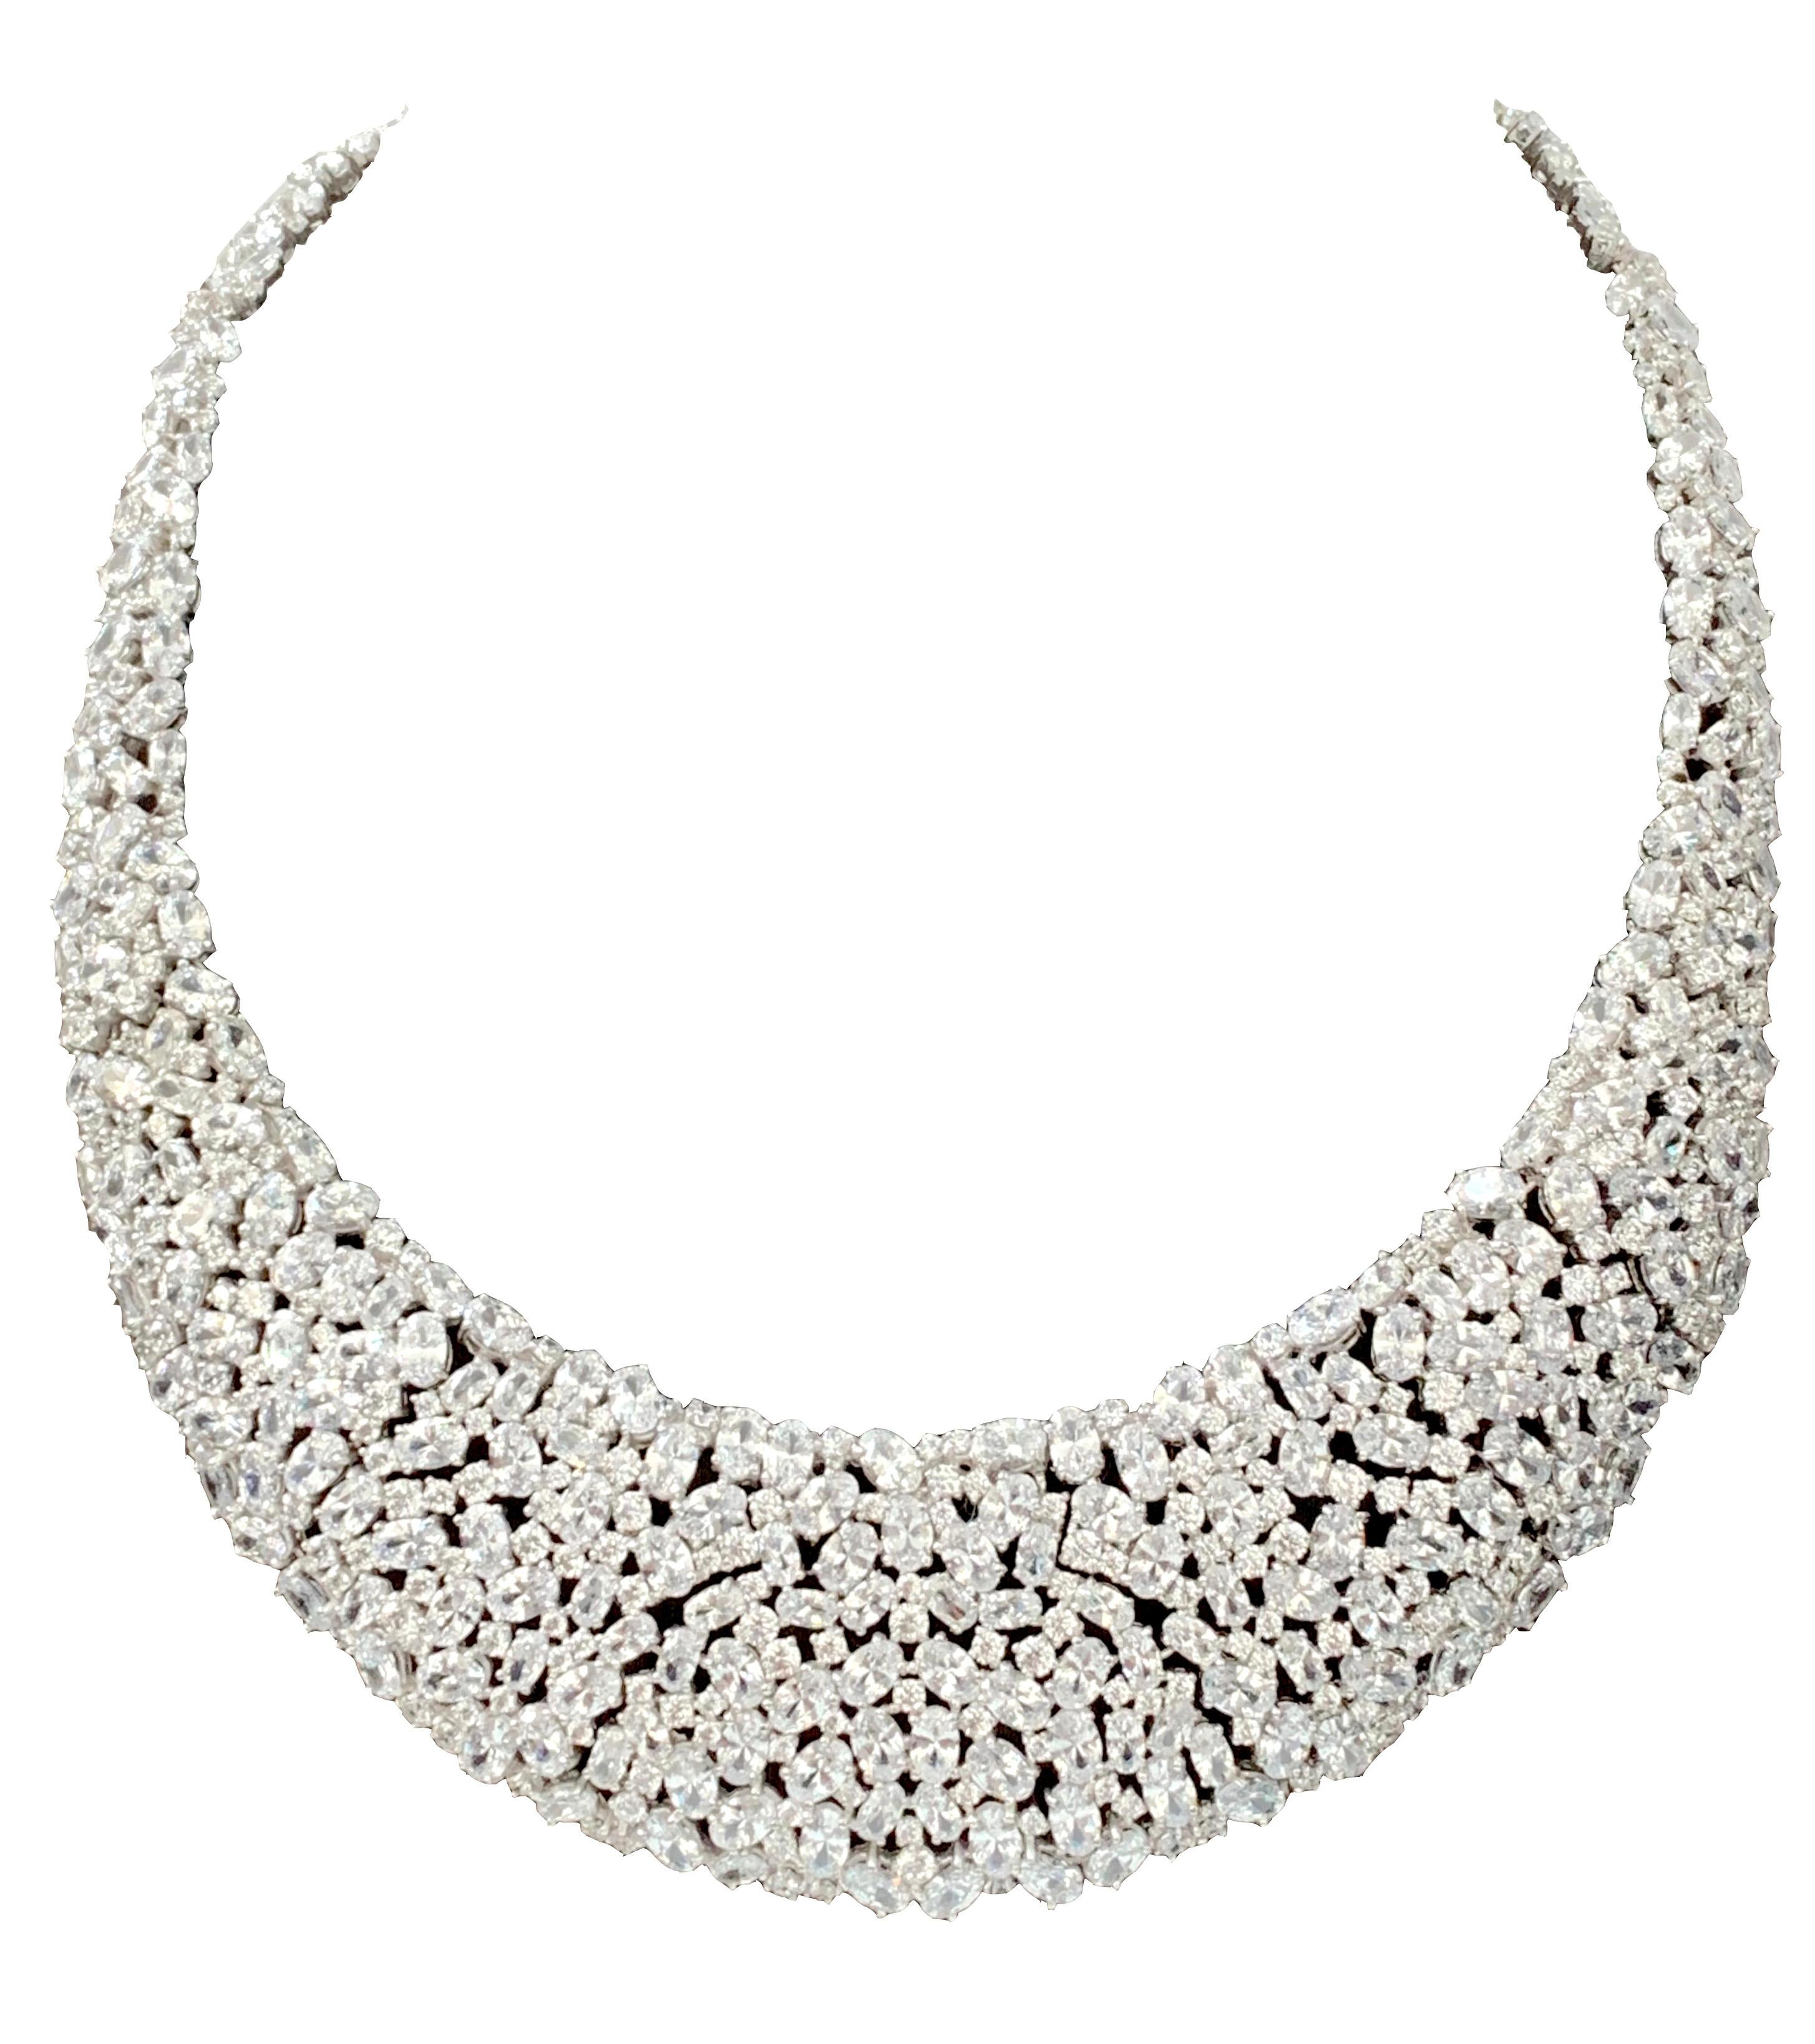 Elegant Clustered Cubic Zirconia Sterling Silver Bib Necklace. Over 500 pieces of Round and Pear Shaped Cubic Zirconia individually handset in platinum rhodium plated sterling silver. The bib is 1.5